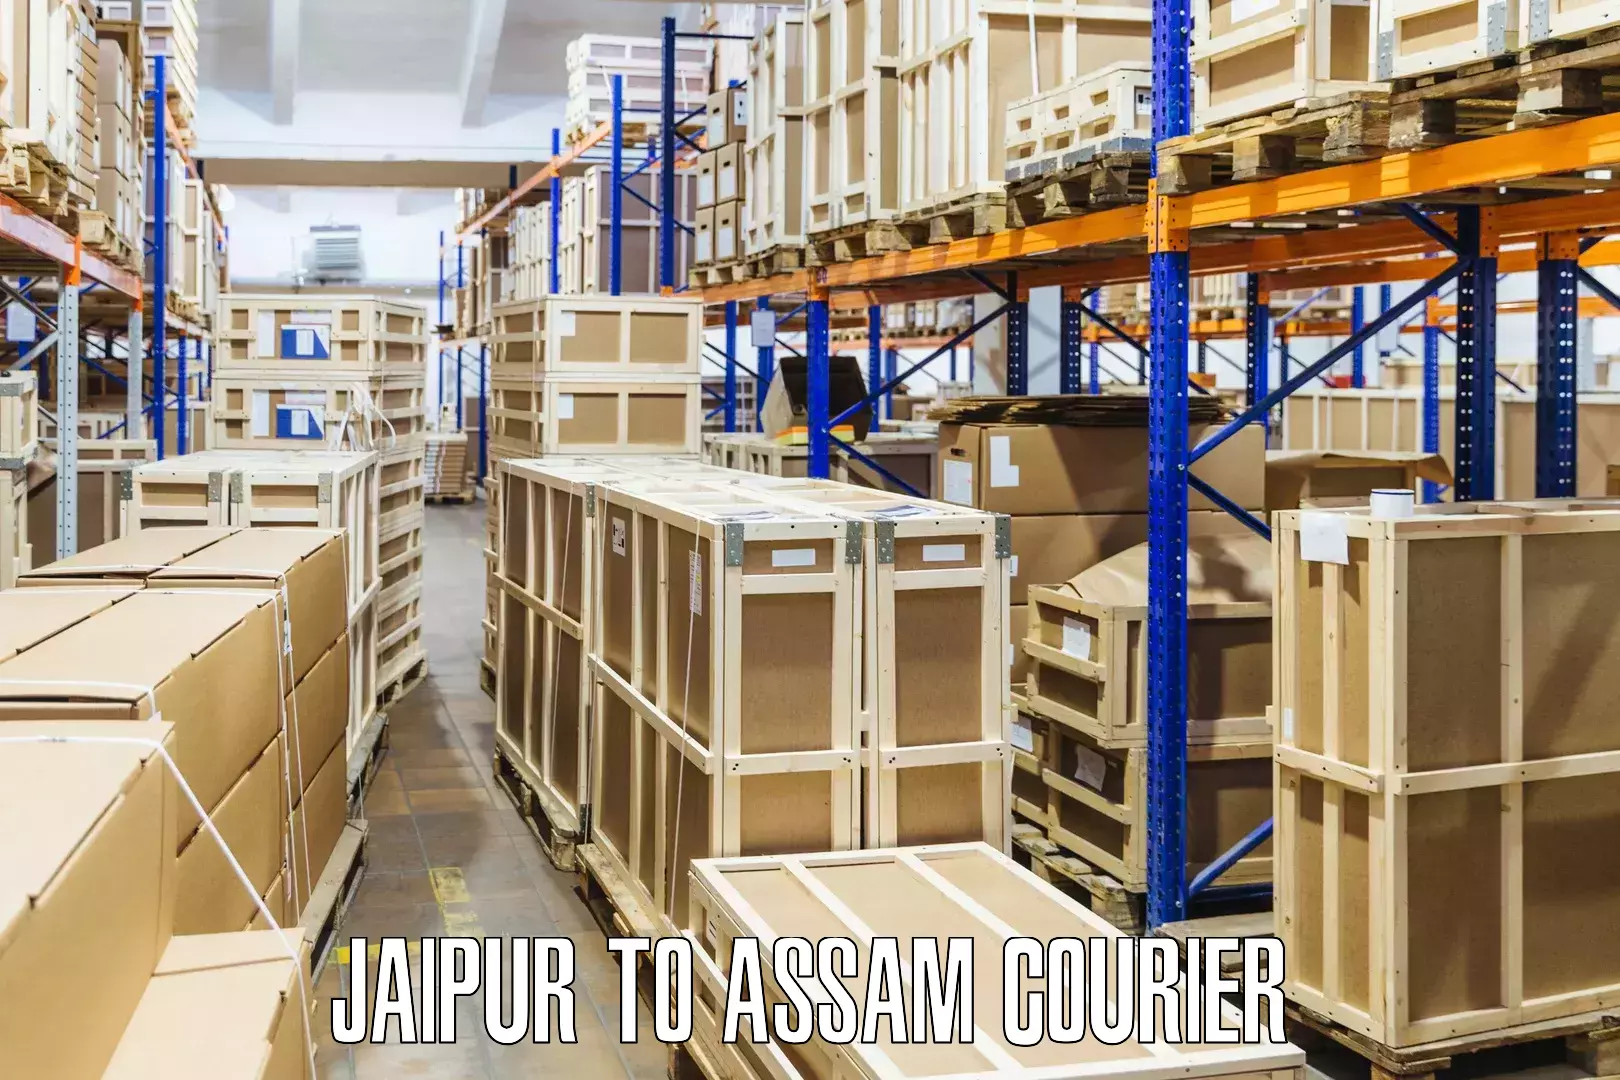 State-of-the-art courier technology Jaipur to Assam